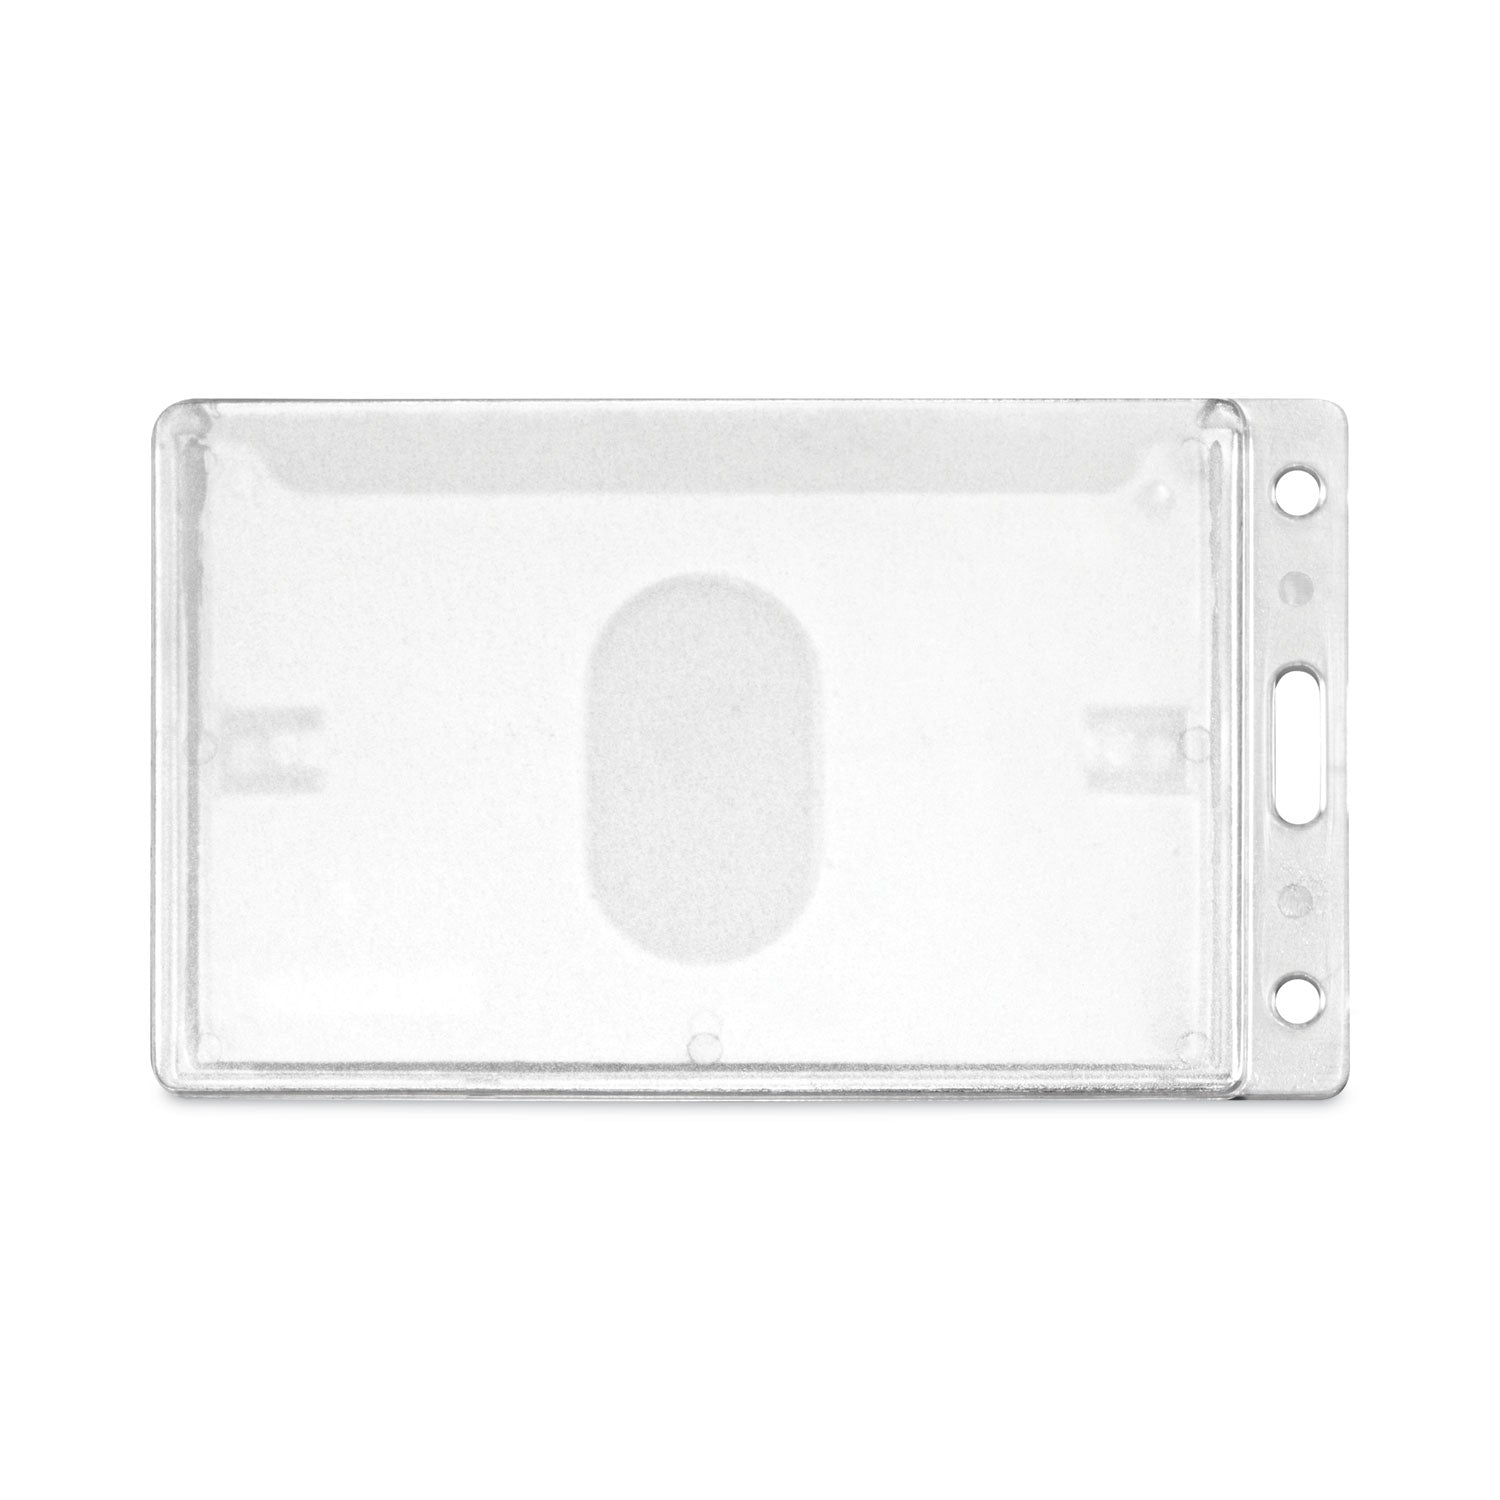 Frosted Two-Card Rigid Badge Holders, Vertical, Frosted 2.5" x 4.13" Holder, 2.13" x 3.38" Insert, 25/Box - 